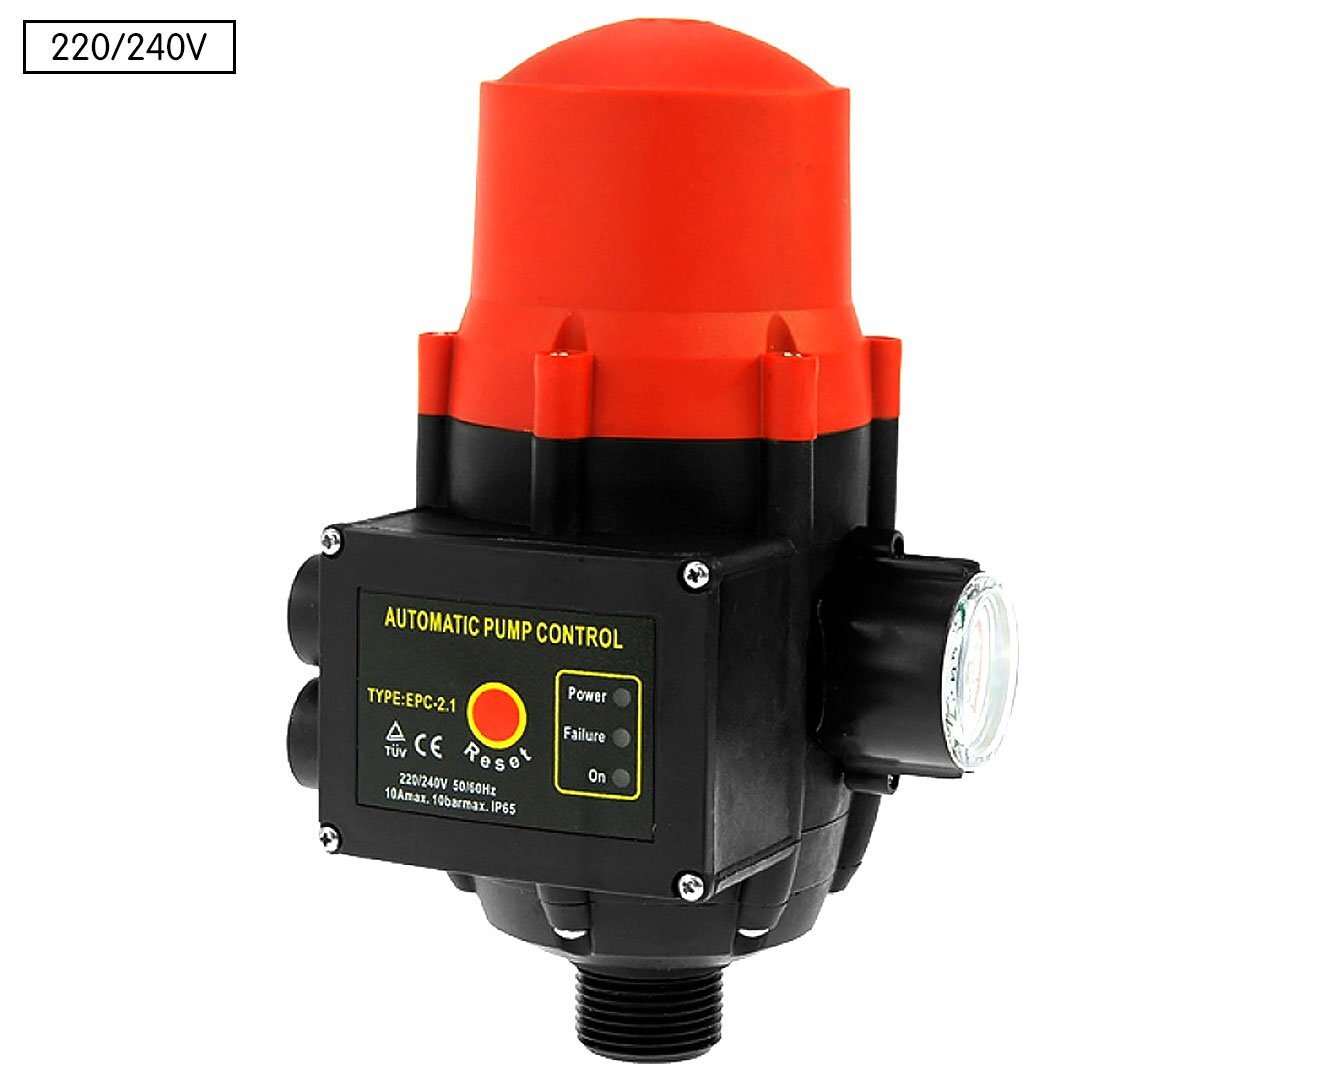 1x Automatic Water Pump Pressure Switch Controller - Red